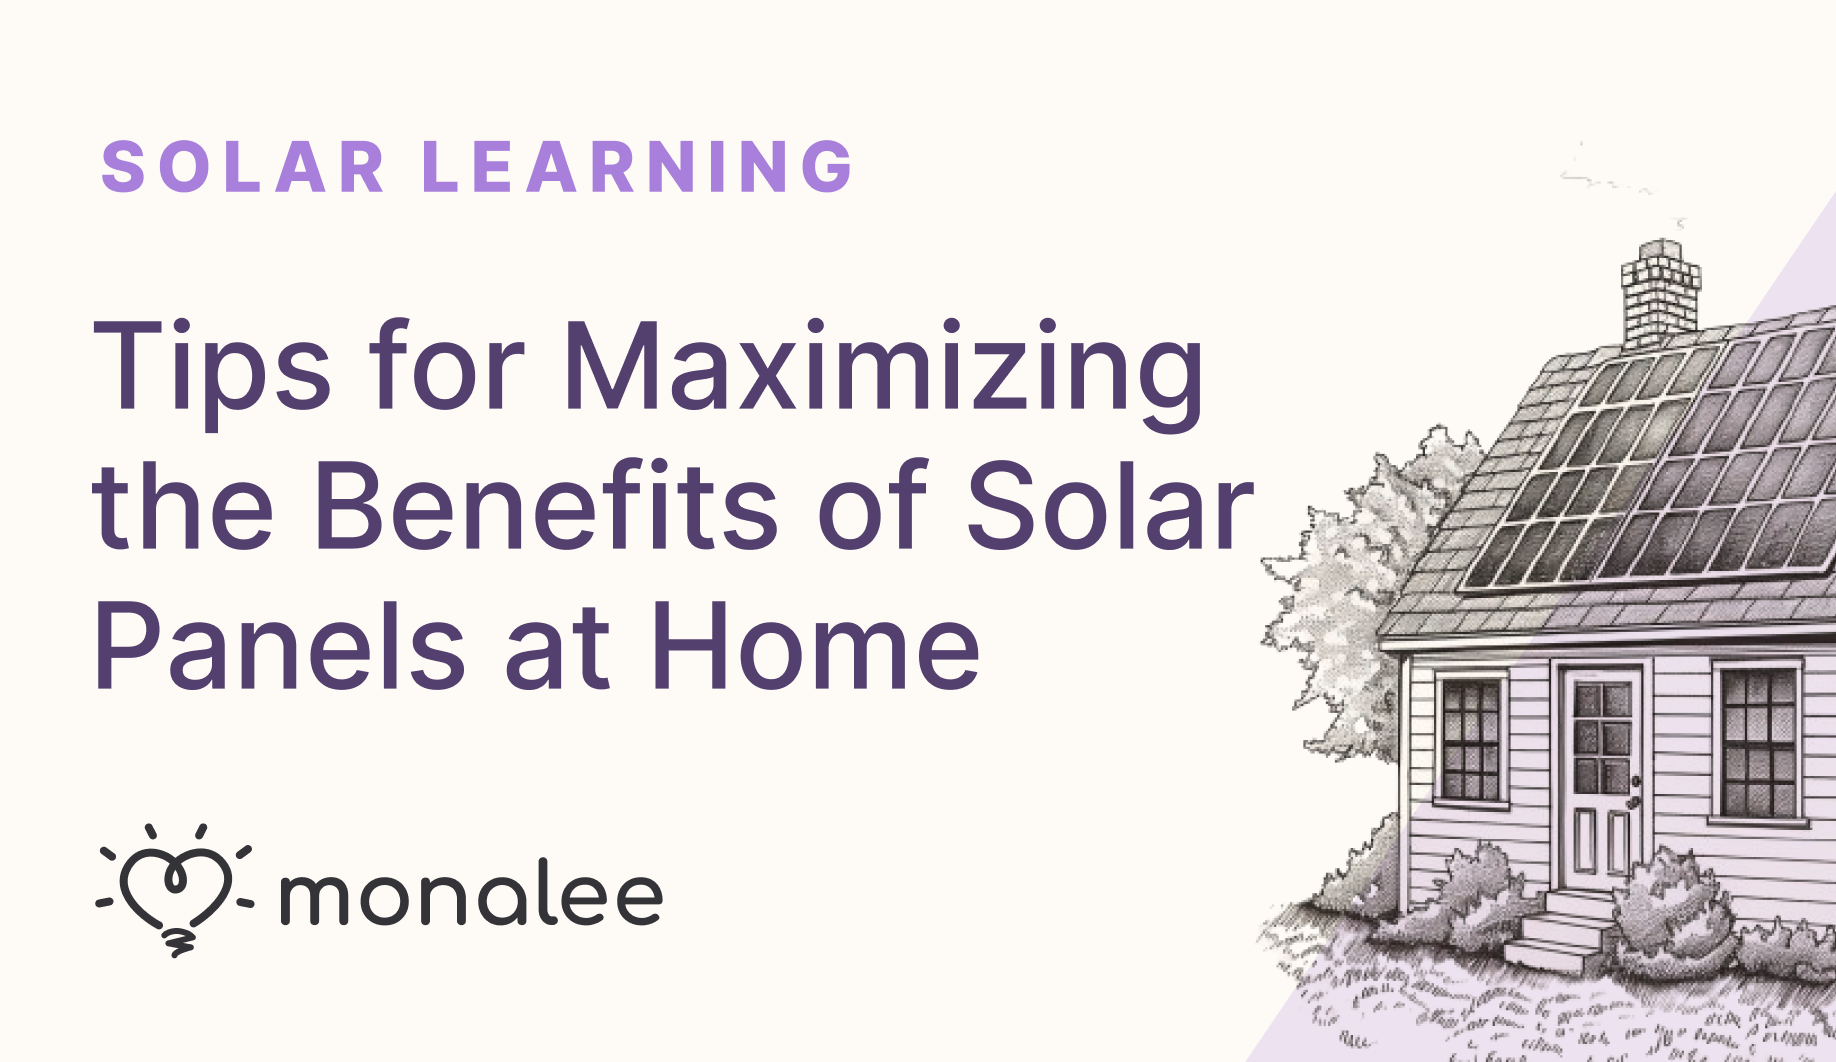 Tips for Maximizing the Benefits of Solar Panels at Home